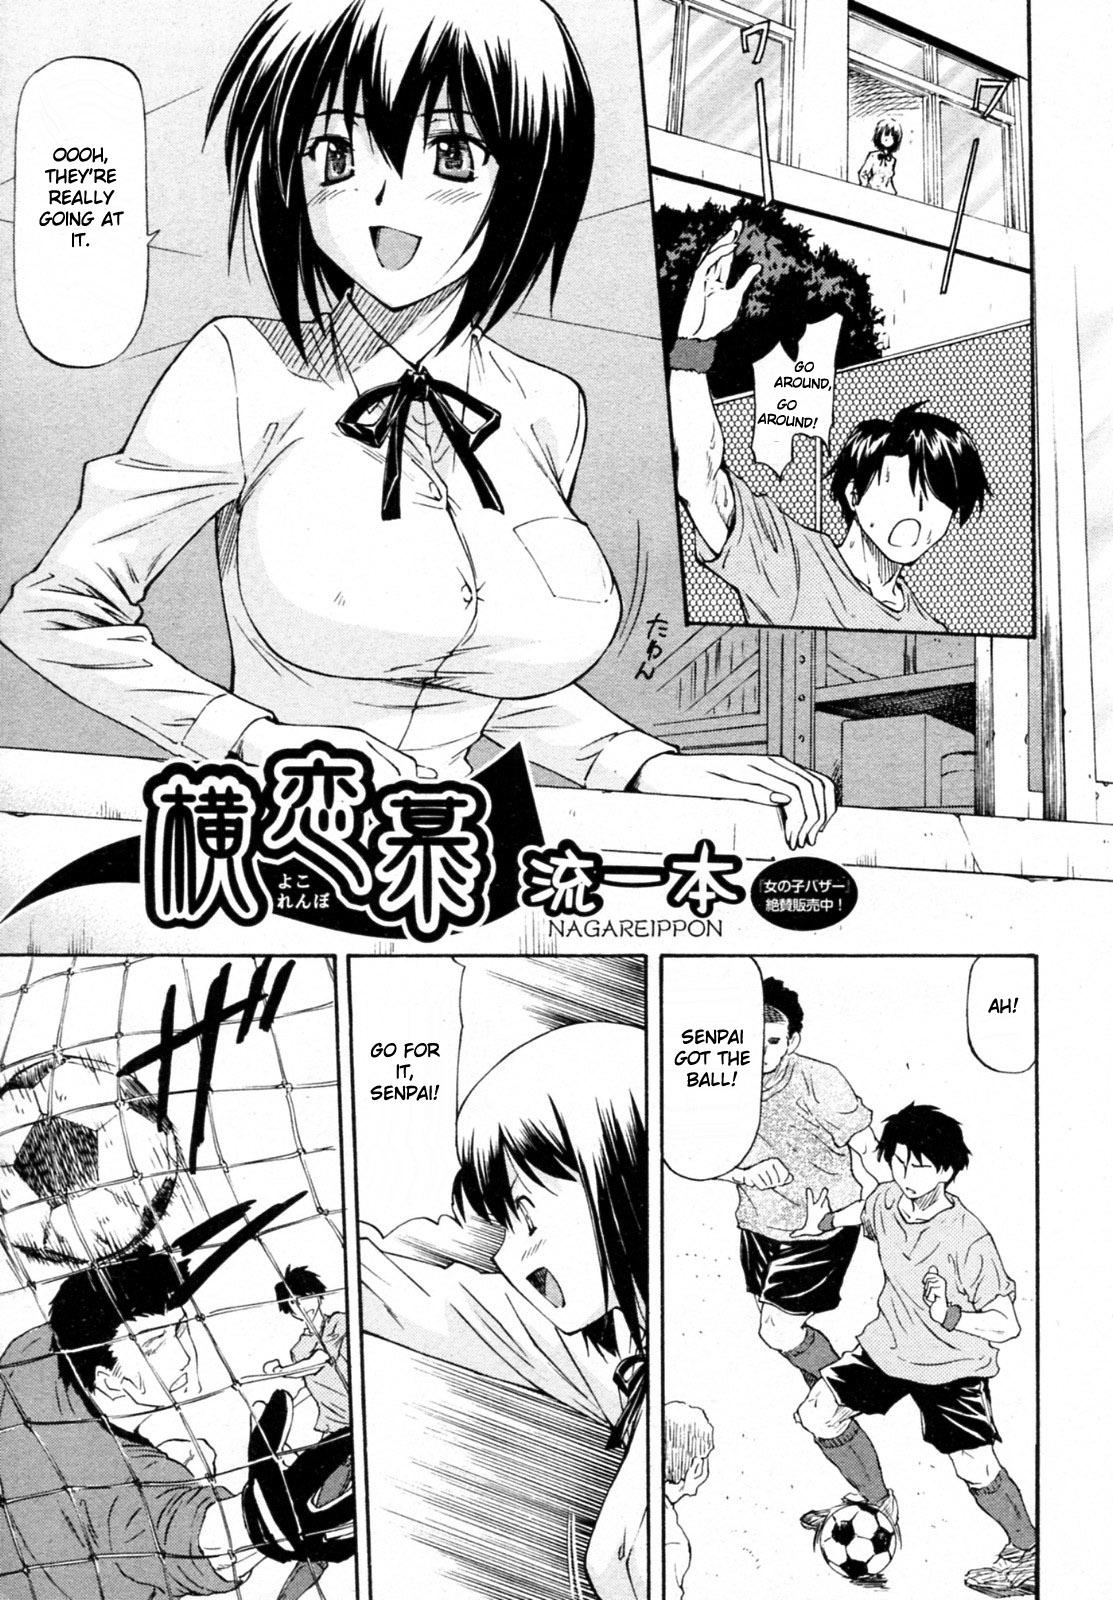 [Nagare Ippon] Meat Hole Ch.02-04,07-09 [English] 0